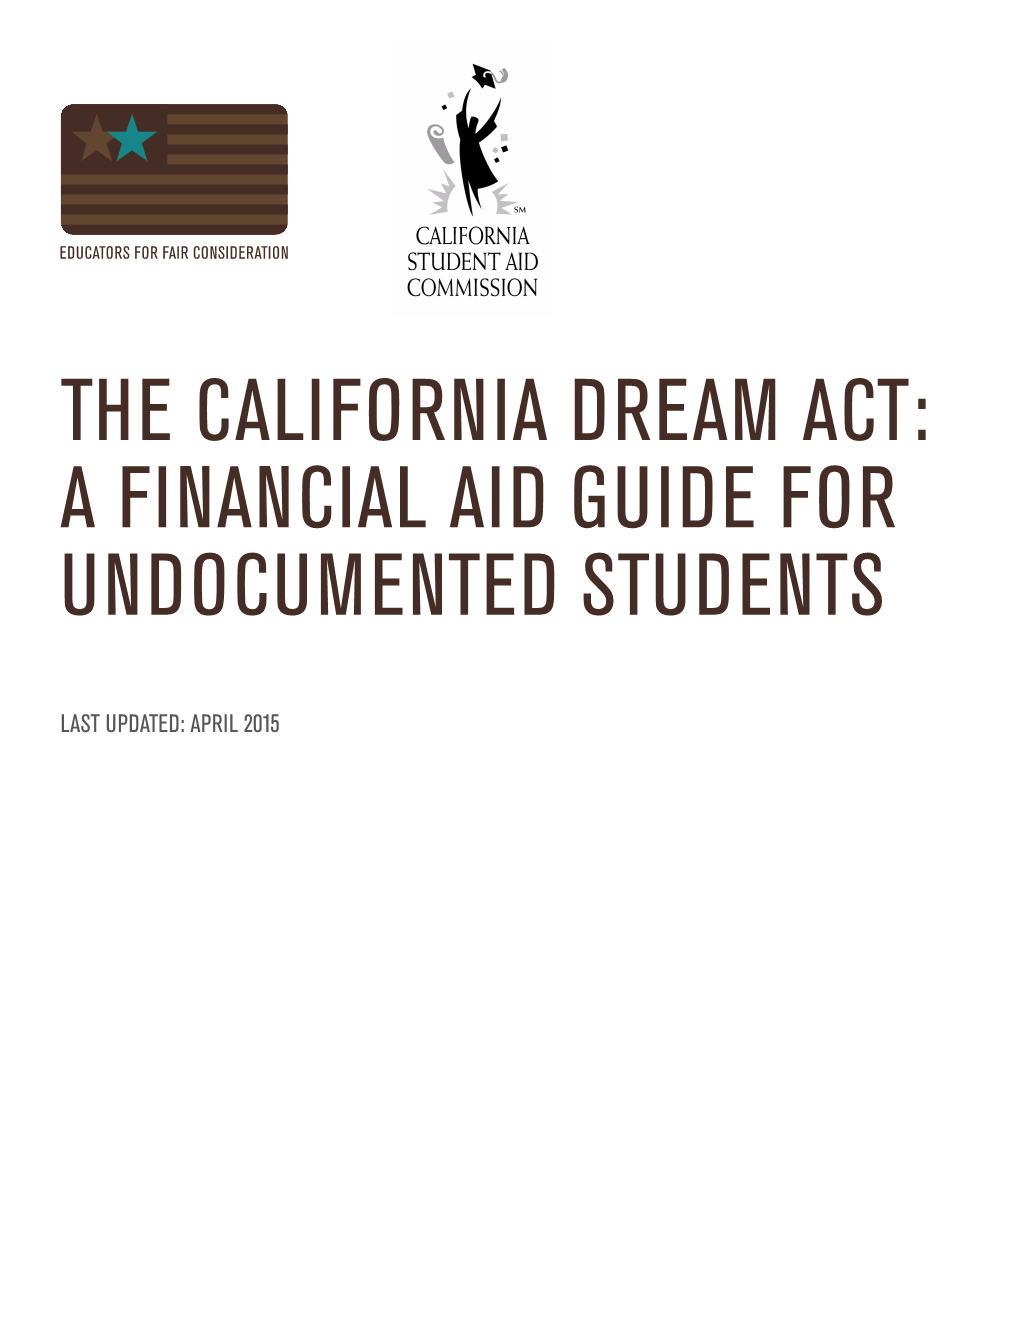 The California Dream Act: a Financial Aid Guide for Undocumented Students